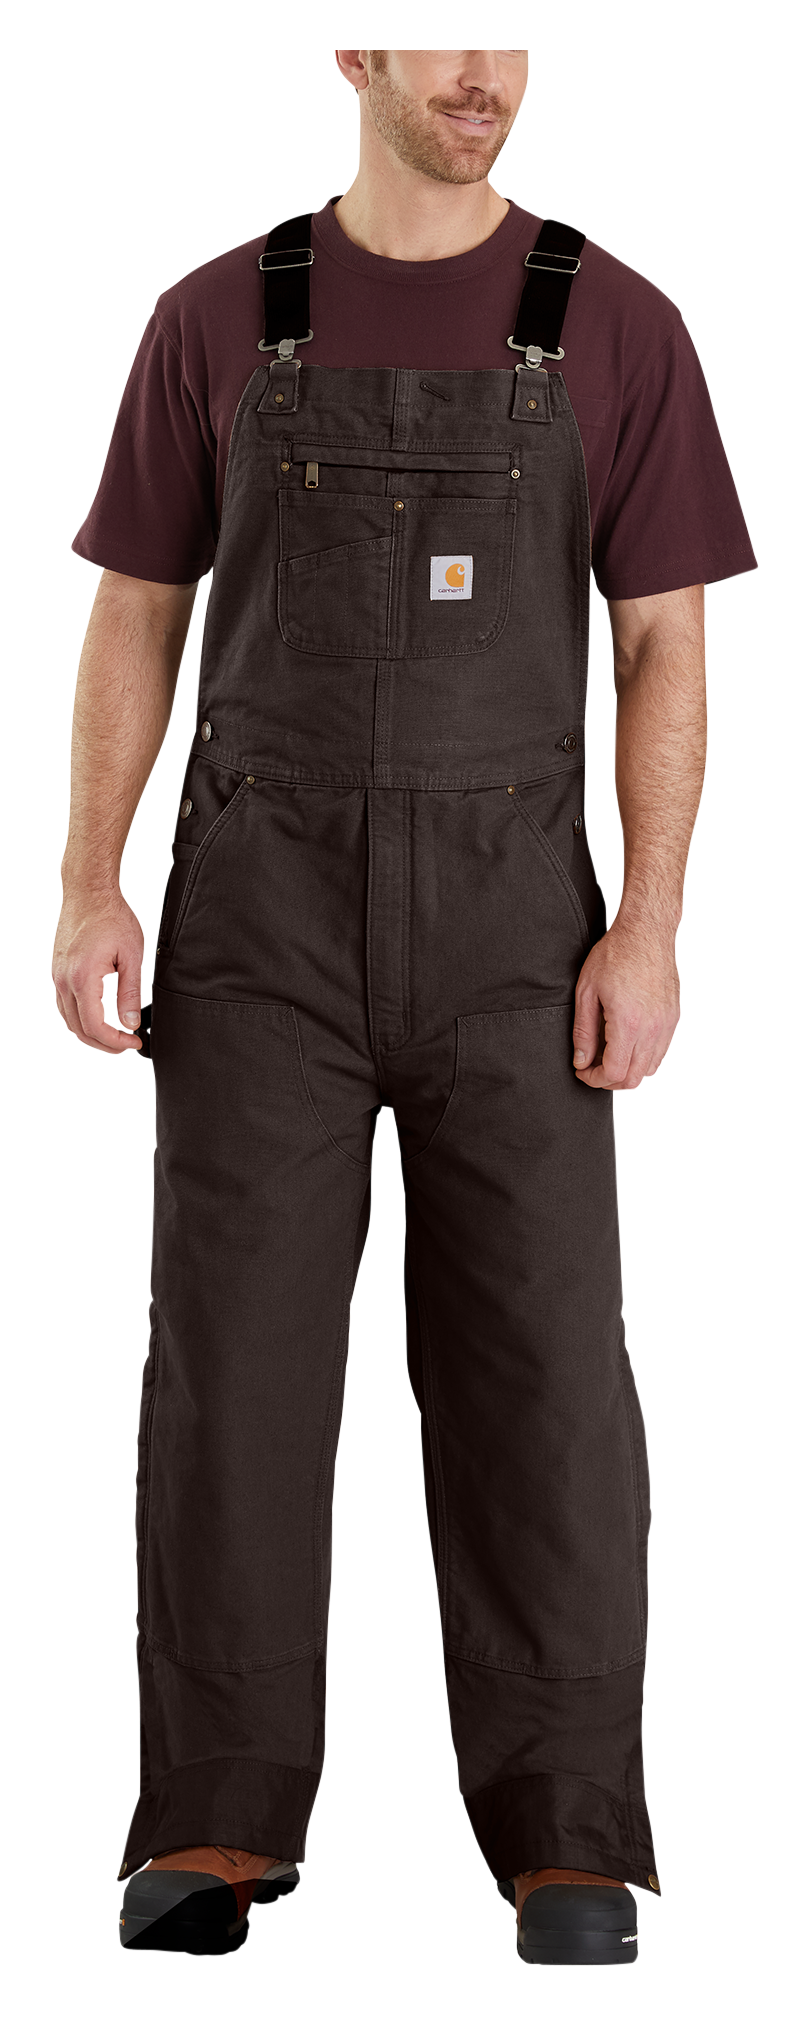  Carhartt Men's Quilt Lined Sandstone Bib Overalls,Carhartt  Brown,42 x 28: Overalls And Coveralls Workwear Apparel: Clothing, Shoes &  Jewelry